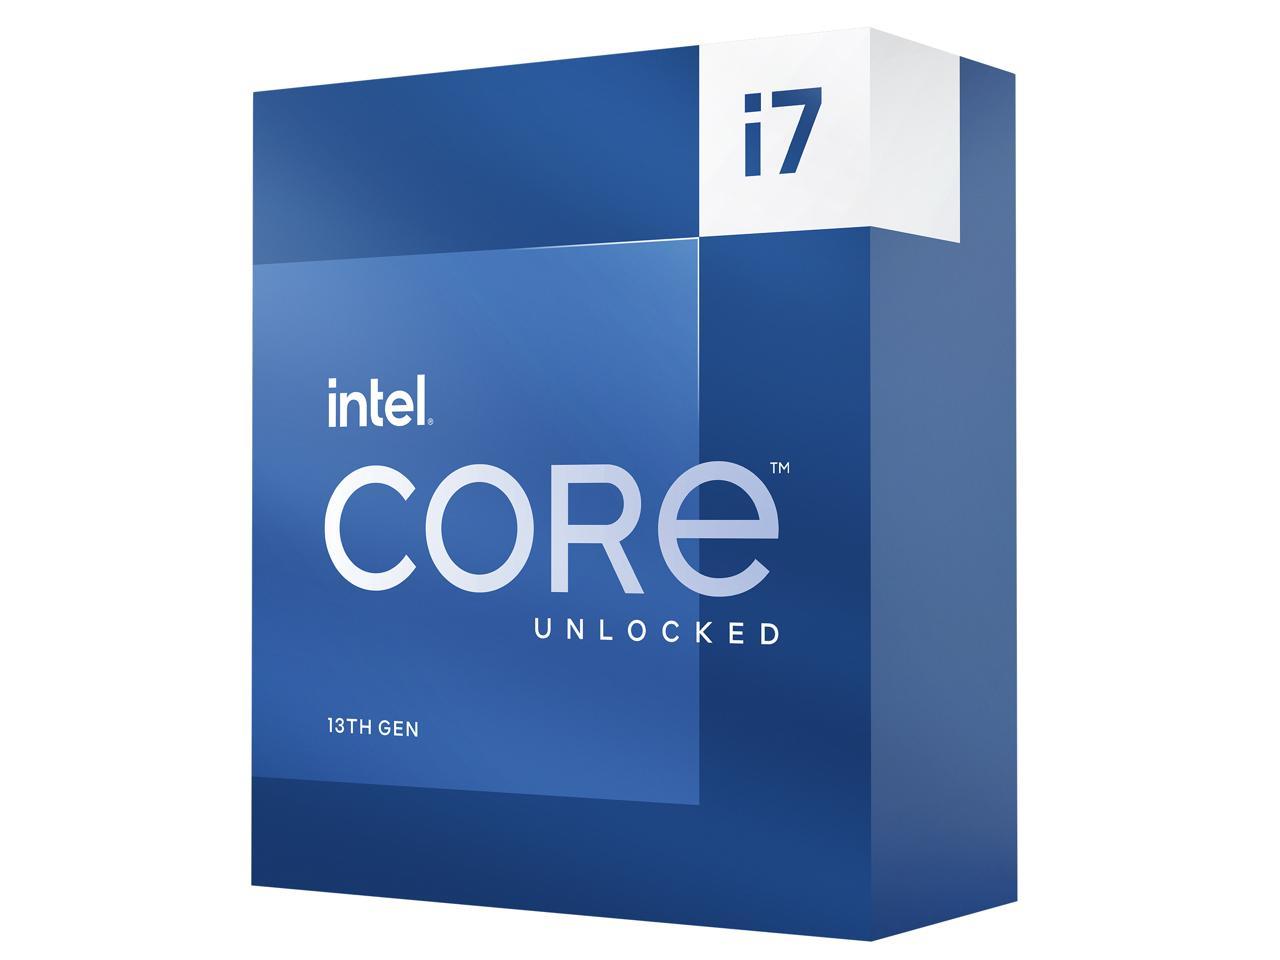  <B>Intel 13th Gen. LGA1700 CPU: Raptor Lake i7-13700KF</B><BR>16-Cores (8P-Cores/8E-Cores) 24-Threads, 5.4GHz (Turbo) 30MB Cache, 253W<BR>No Intergrated Graphics, No CPU Cooler Included  